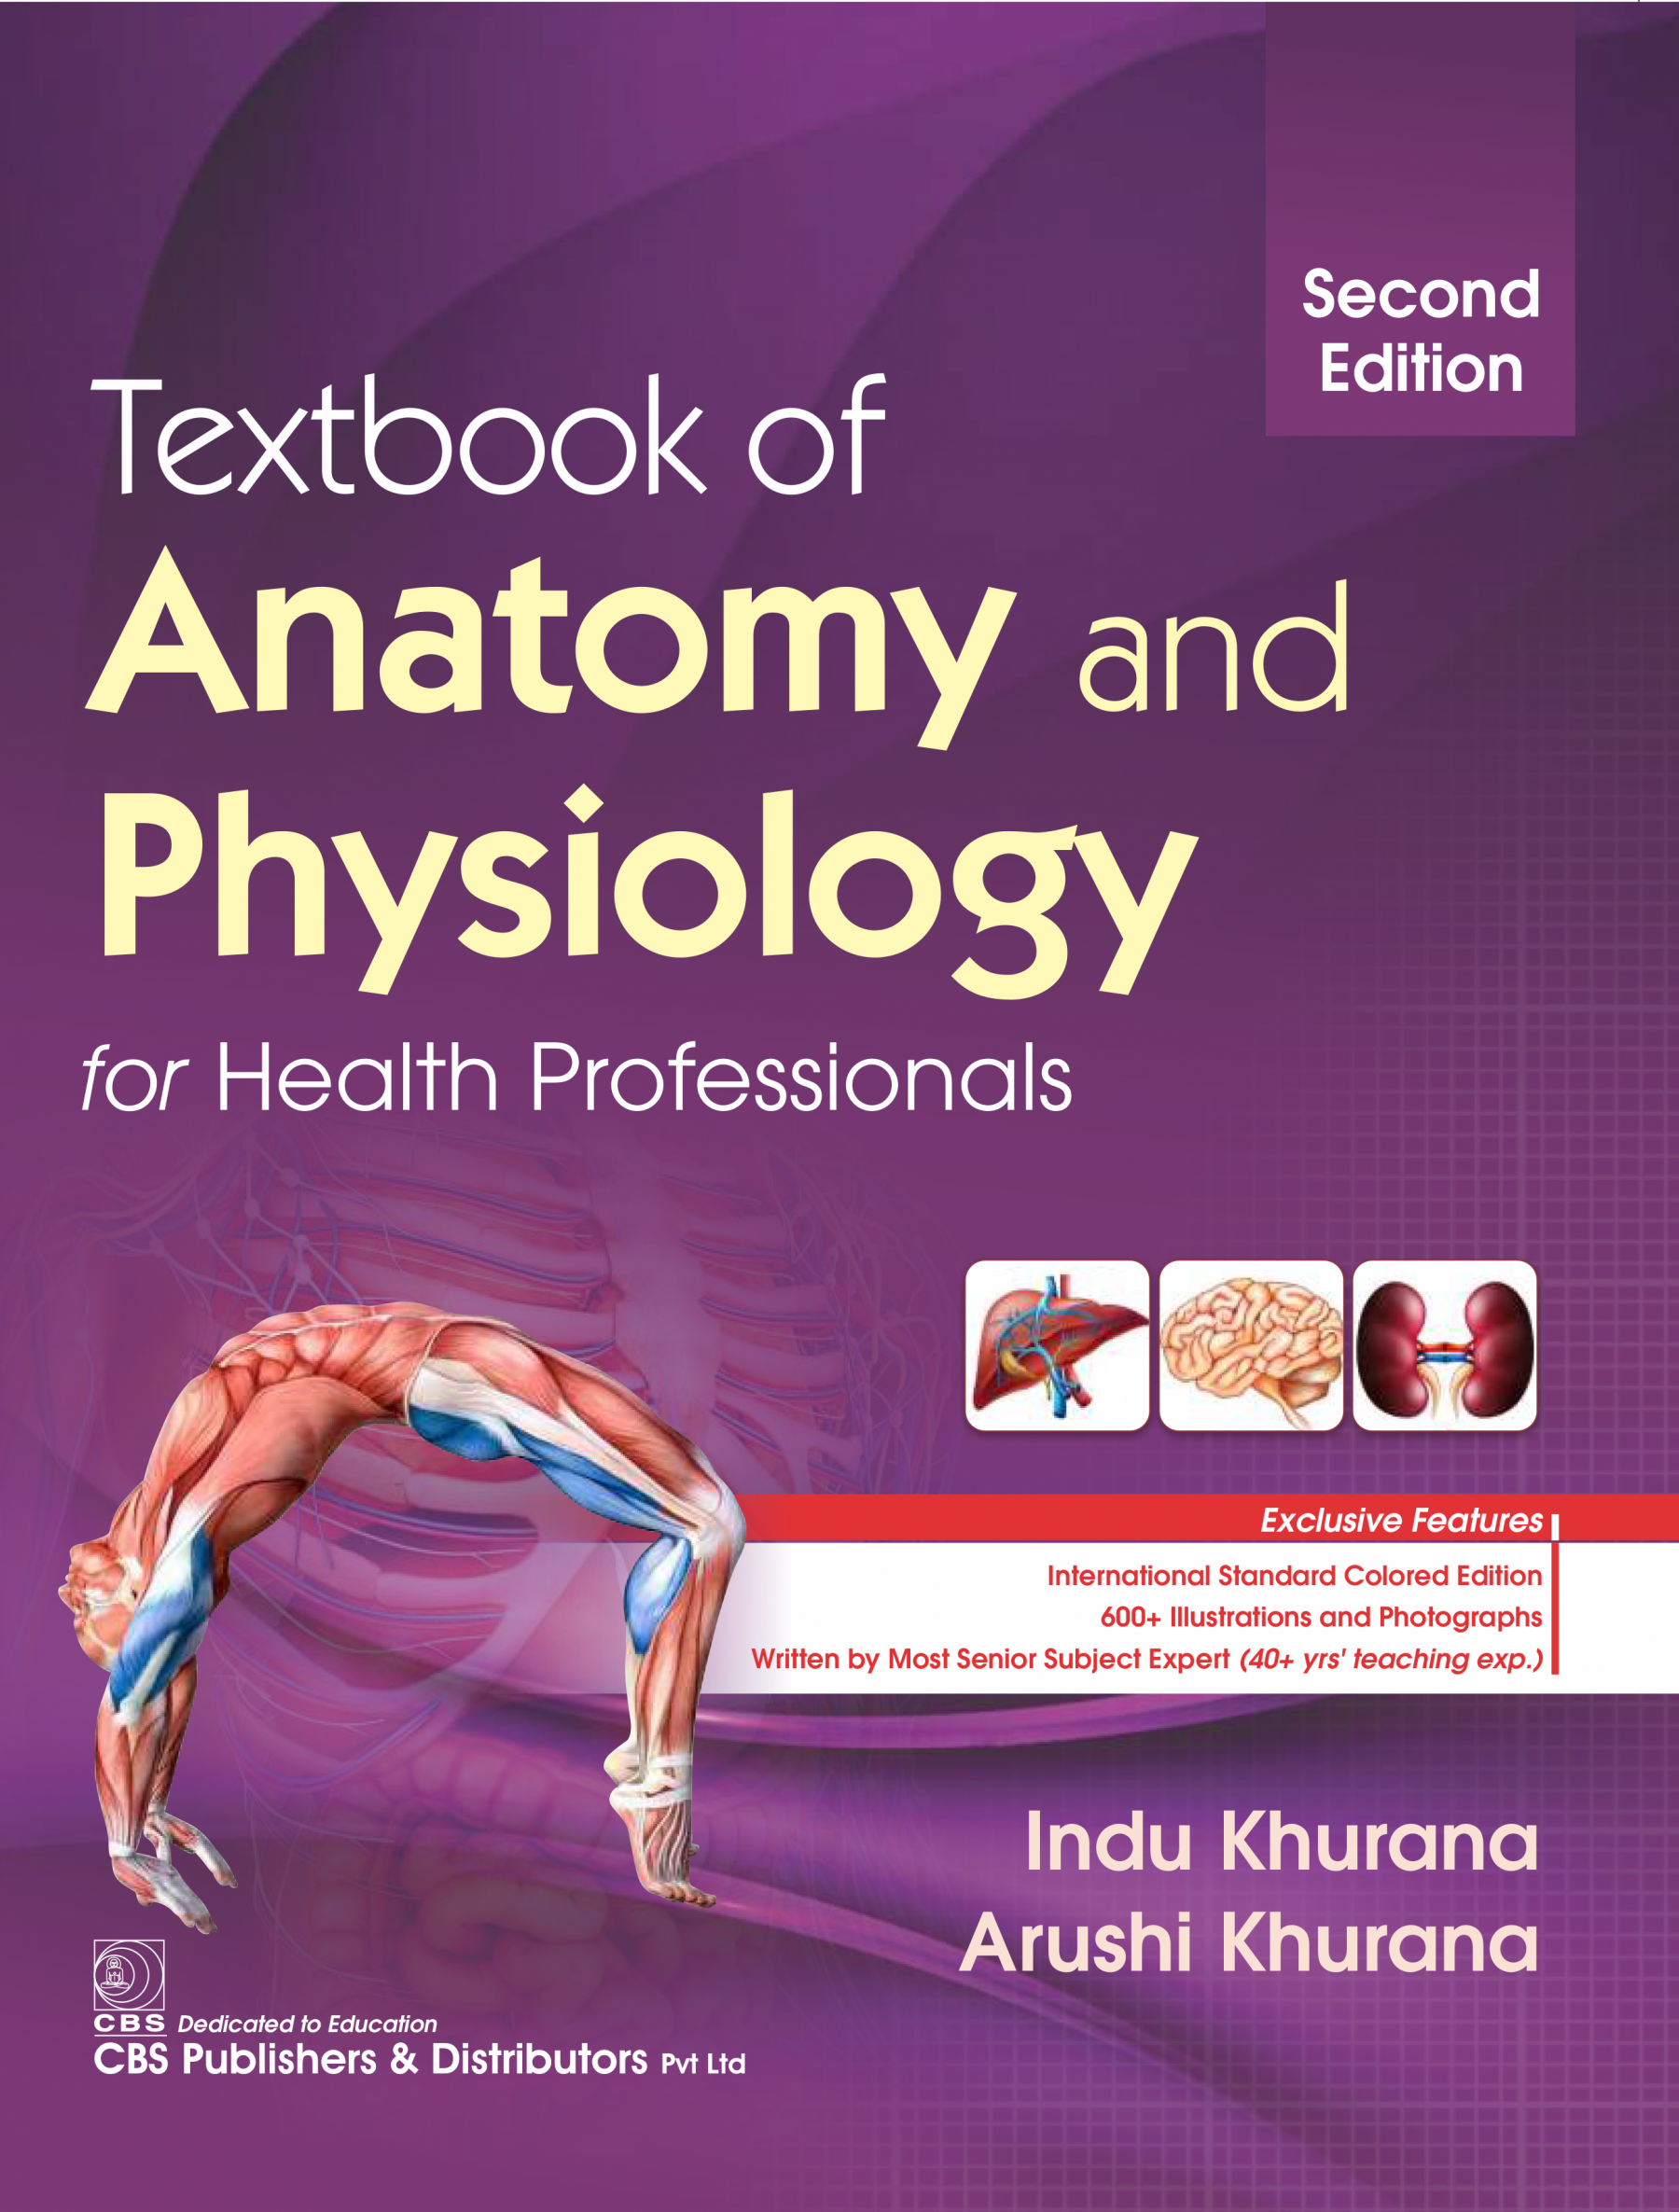 Textbook of Anatomy and Physiology, 2/e